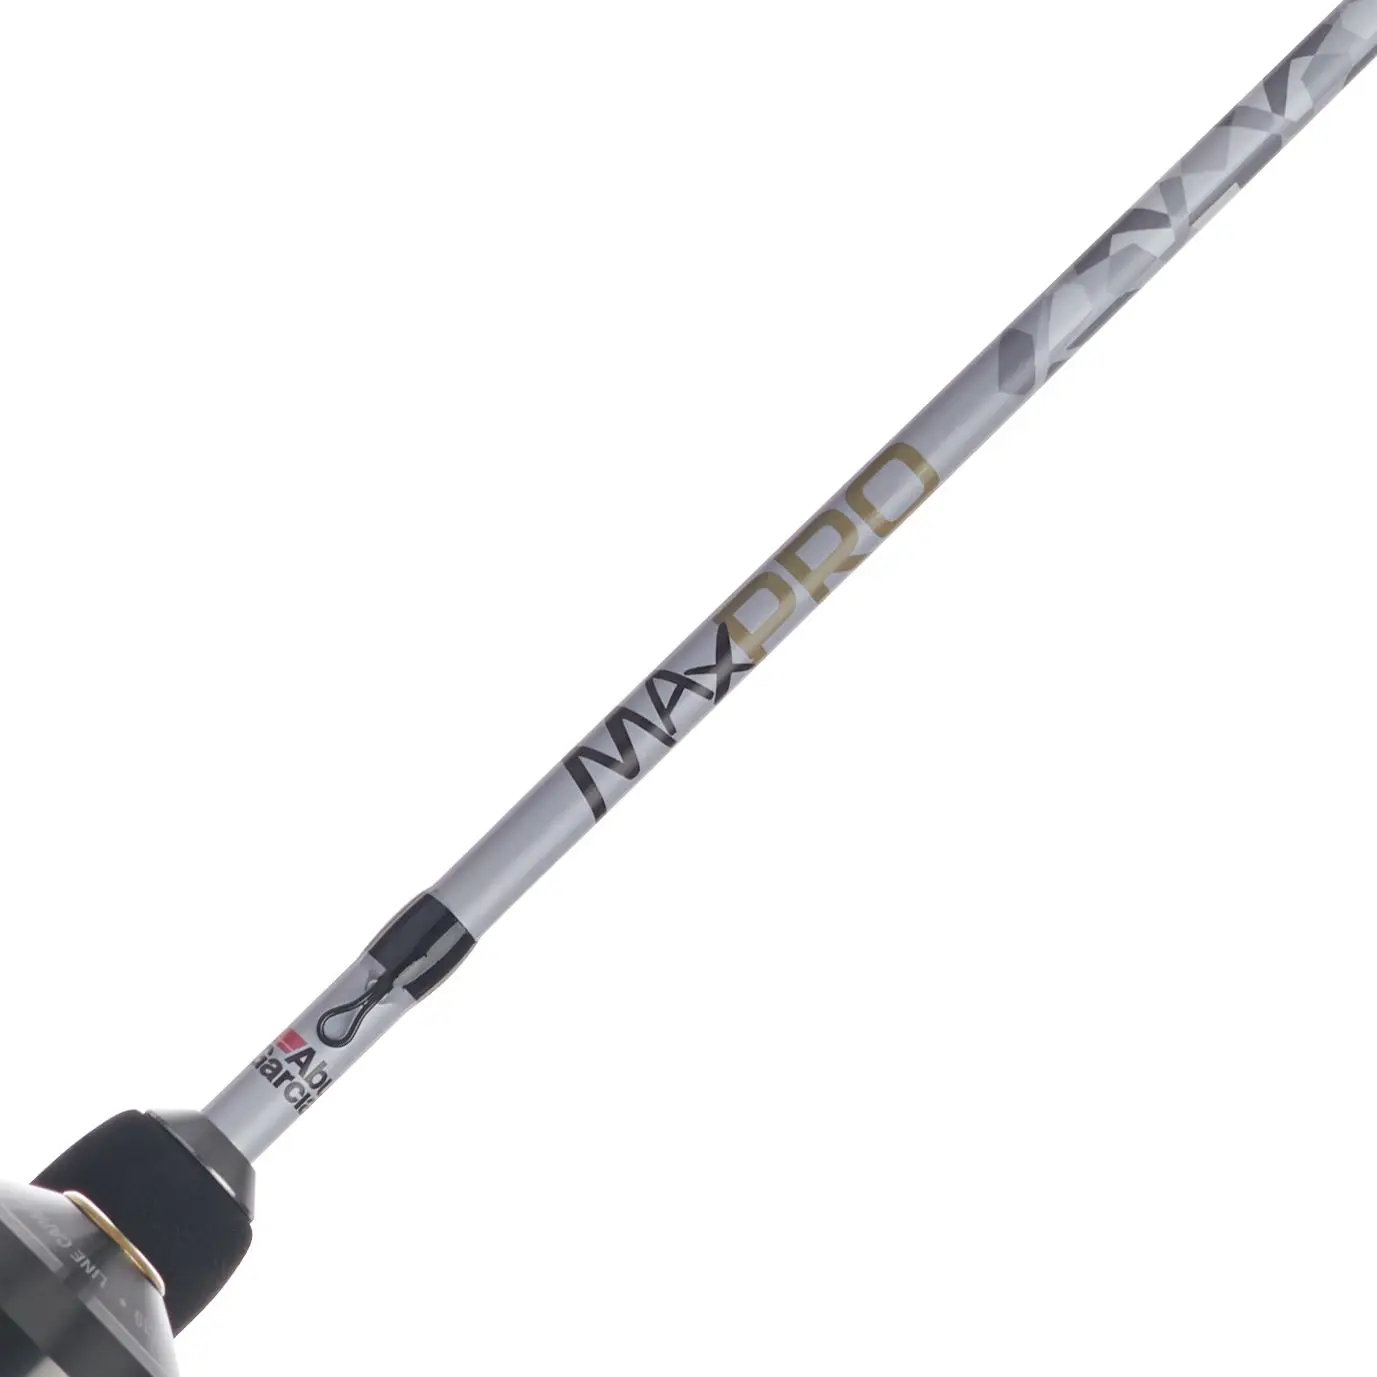 6’ Max PRO Fishing Rod and Reel Spincast Combo enlarge